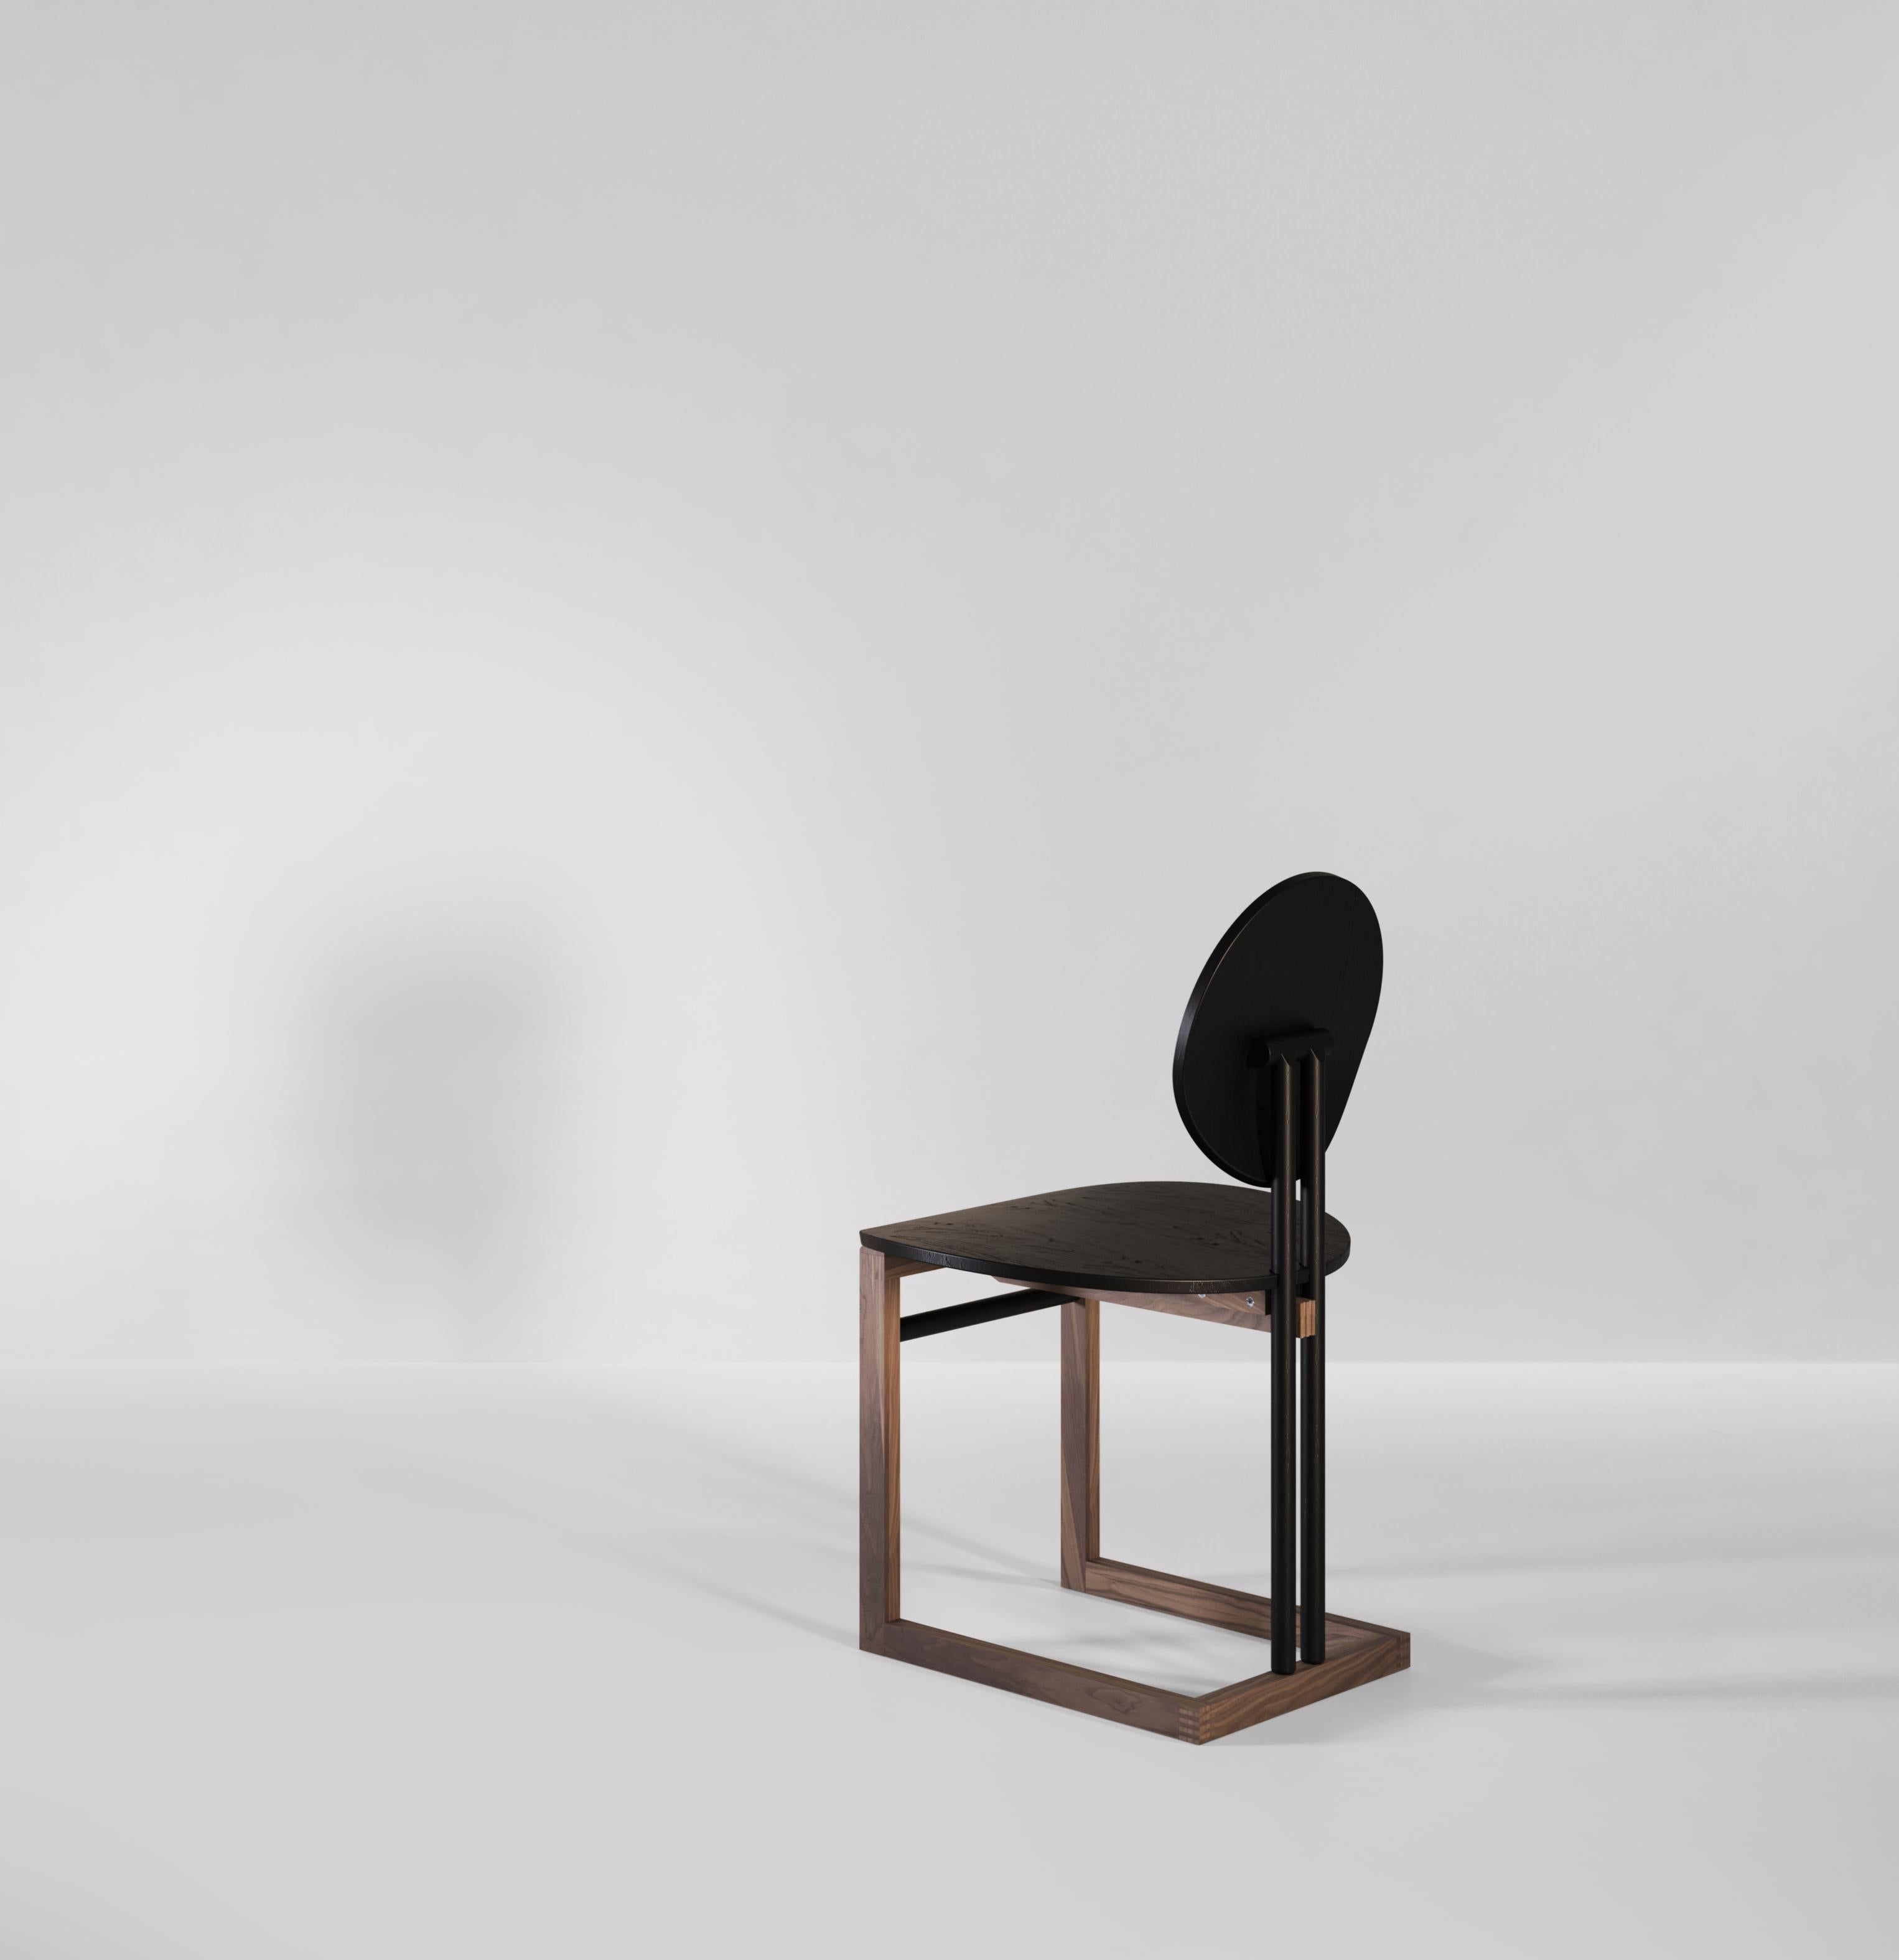 A handcrafted wooden dining chair inspired by vintage forms and contemporary techniques. Two almost-circles acting as the backrest and seat offering comfort and style. The structure holding the chair is in a contrasting wood and is designed with